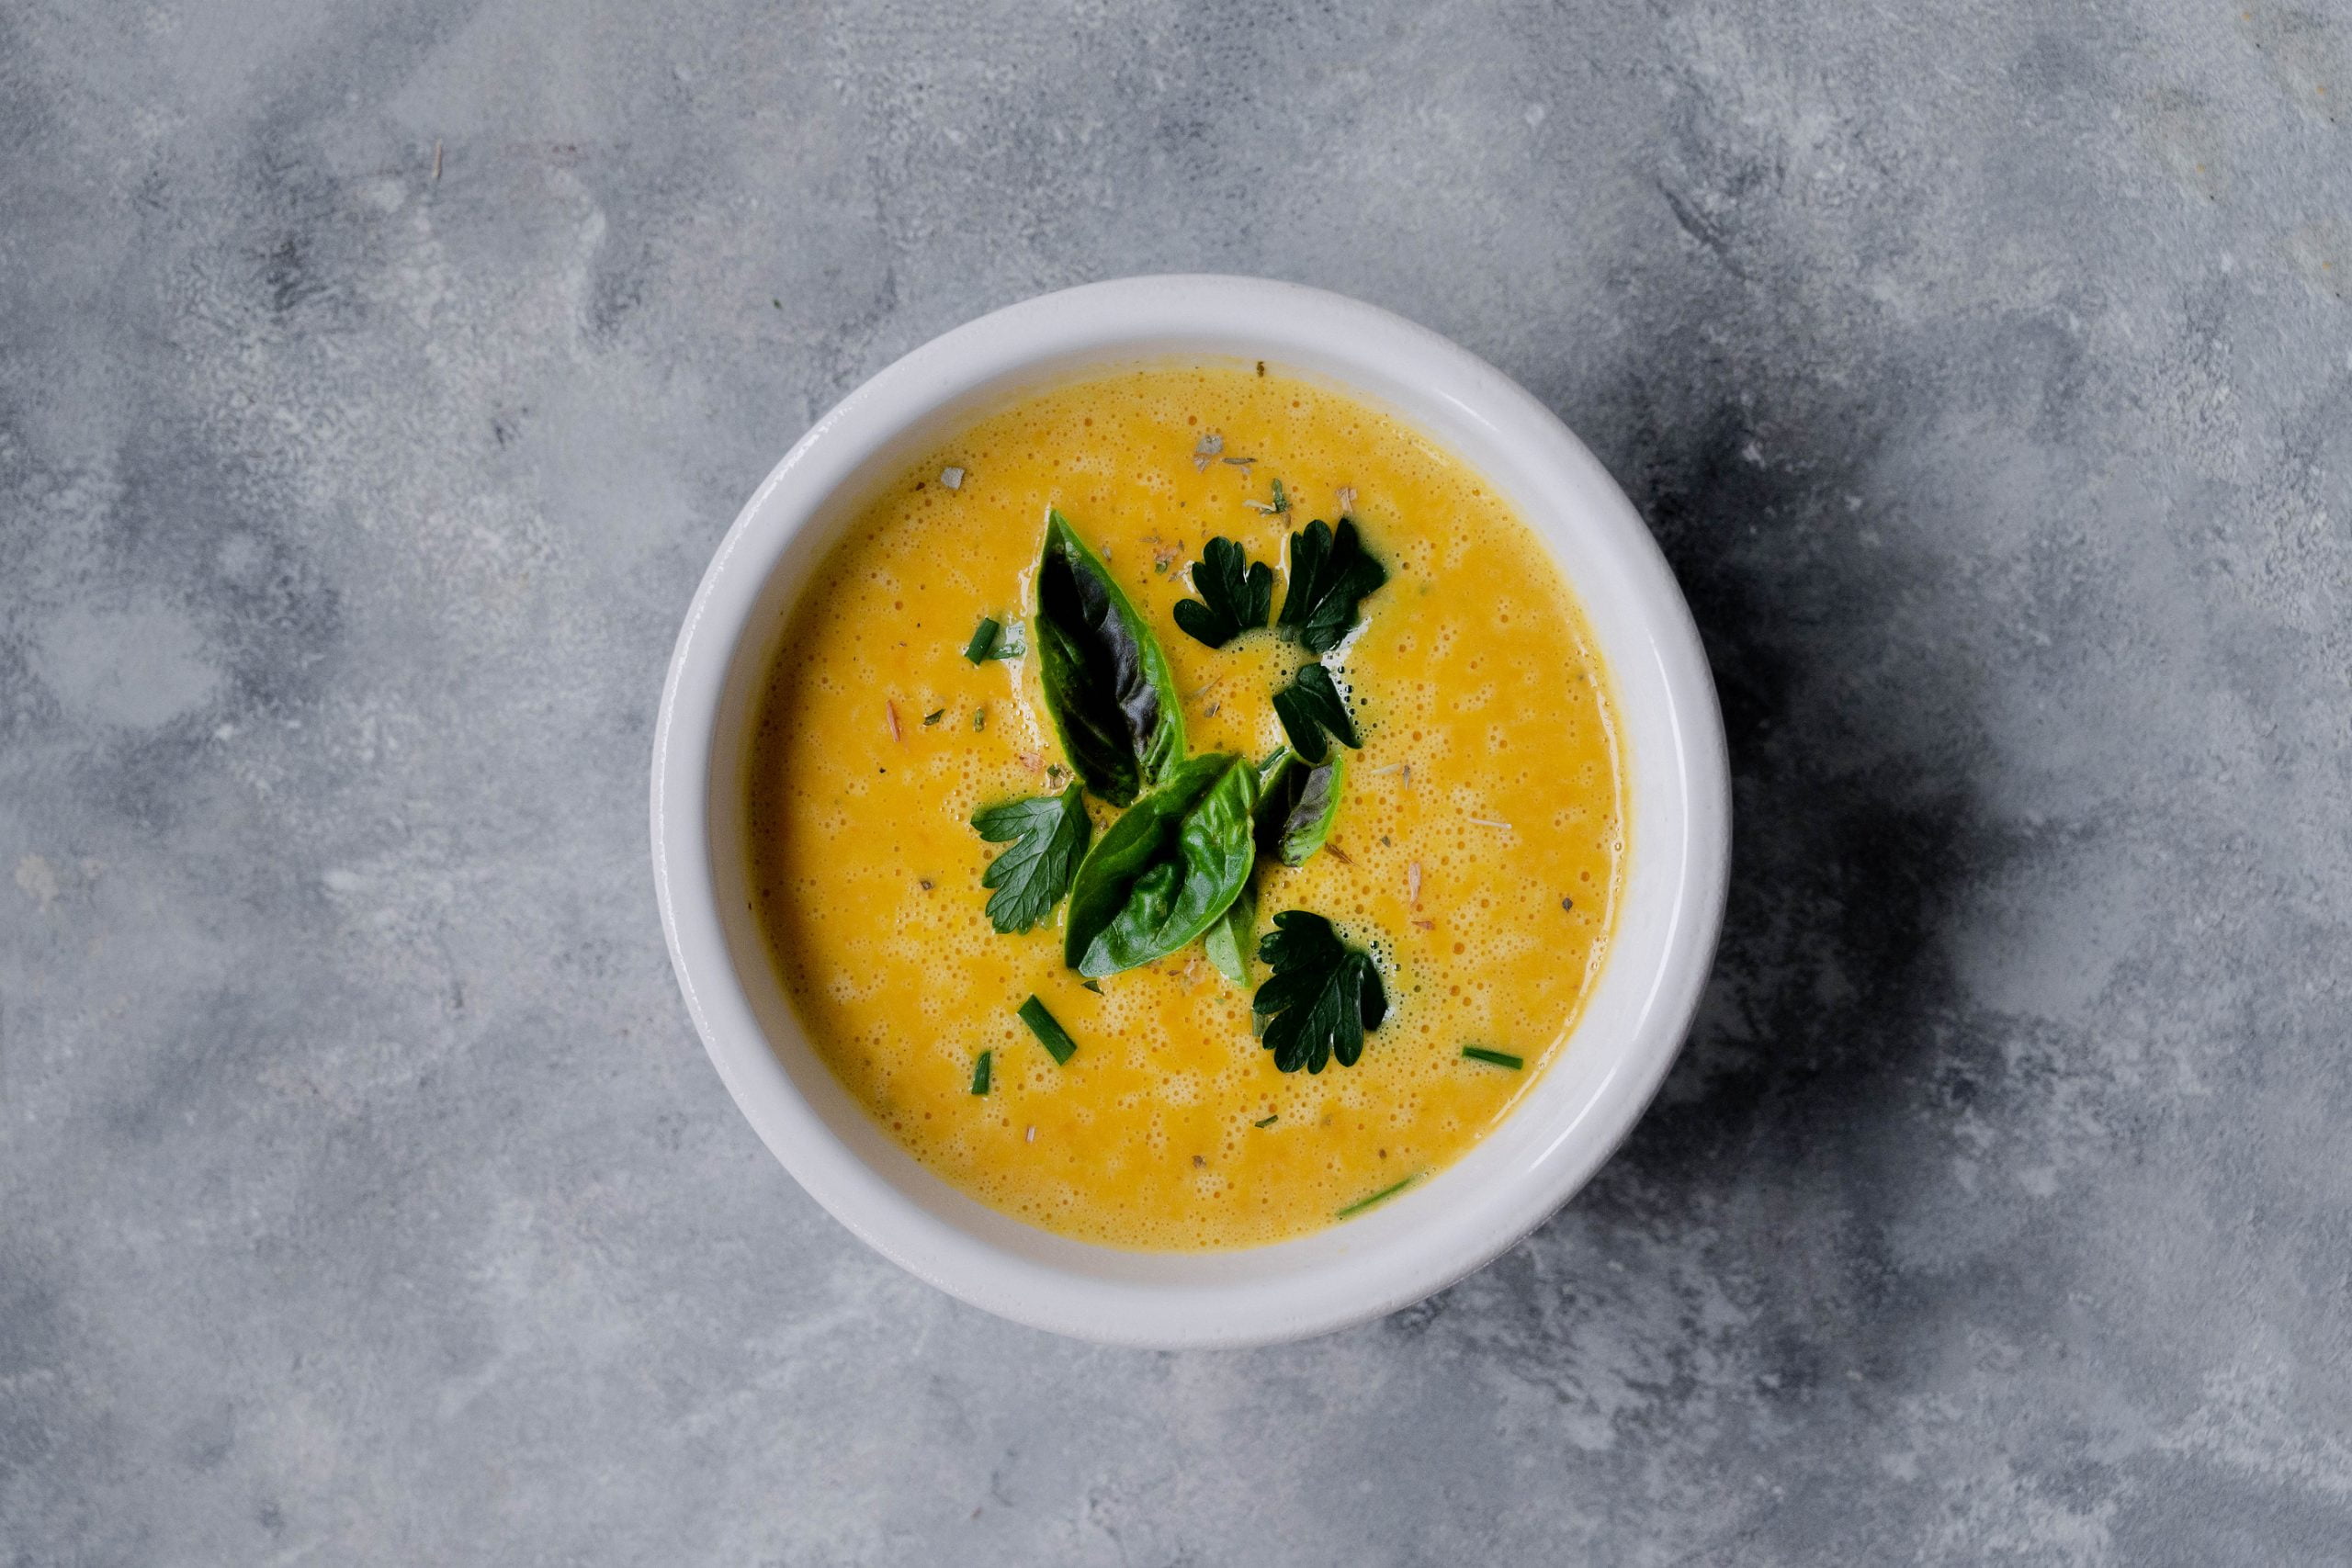 What’s for dinner? This nourishing butternut squash soup recipe